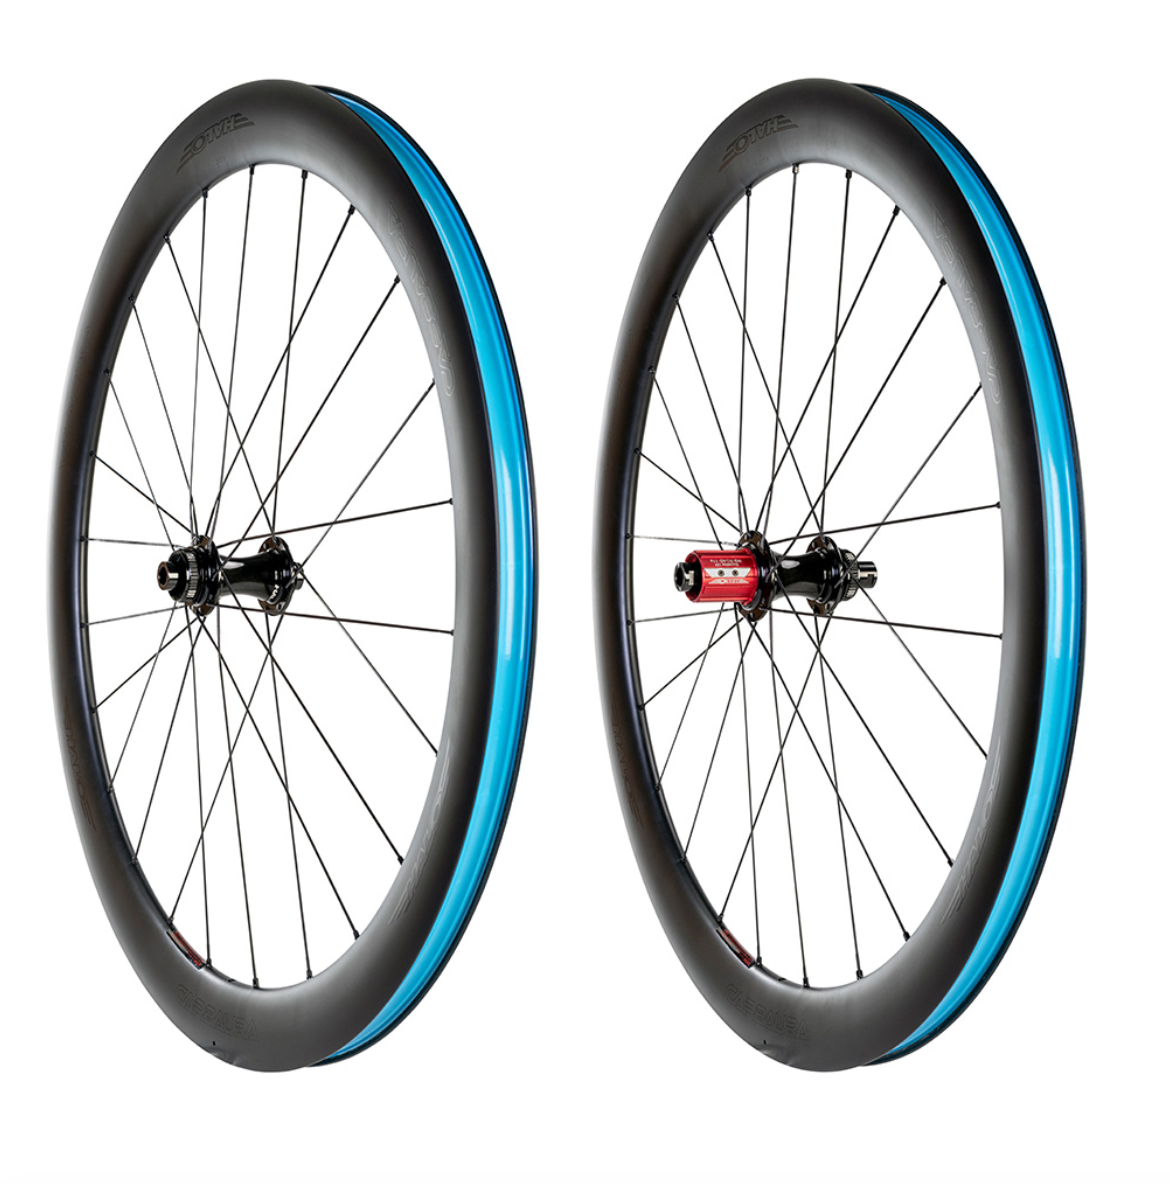 Carbaura RCD 50mm Wheelsets